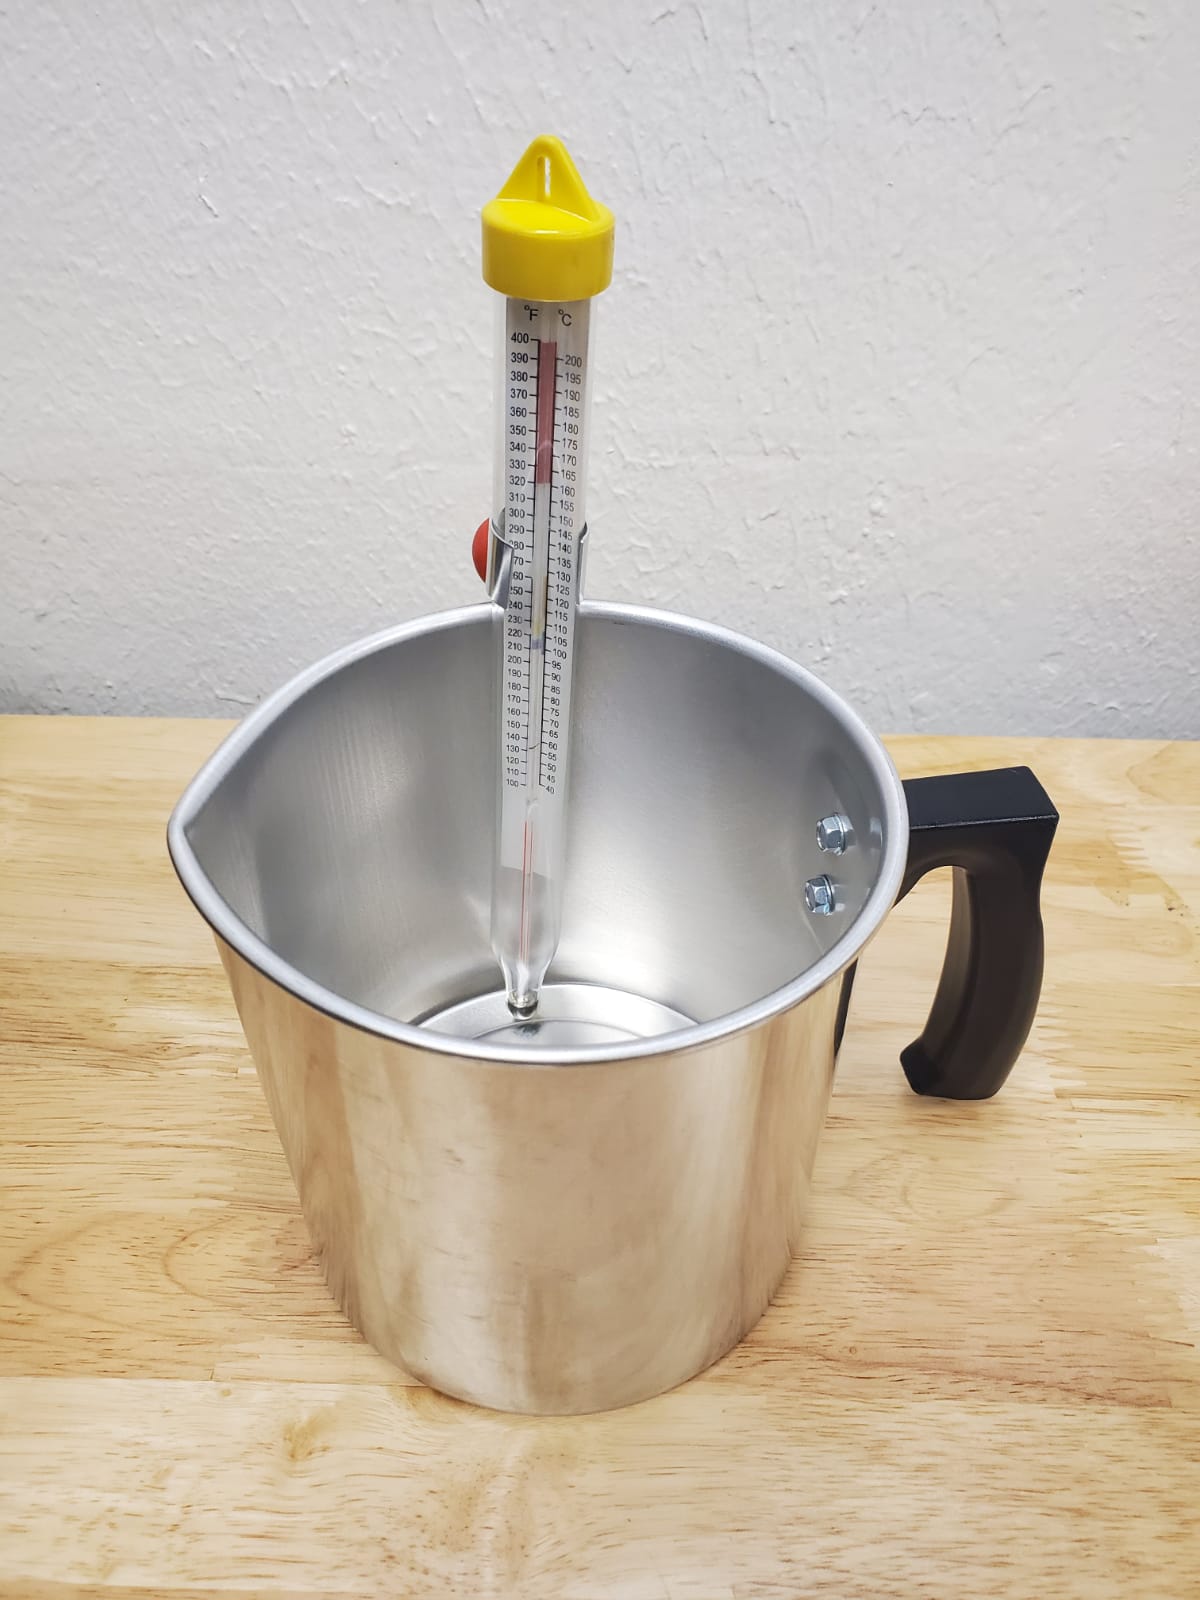 Candle Making Thermometer